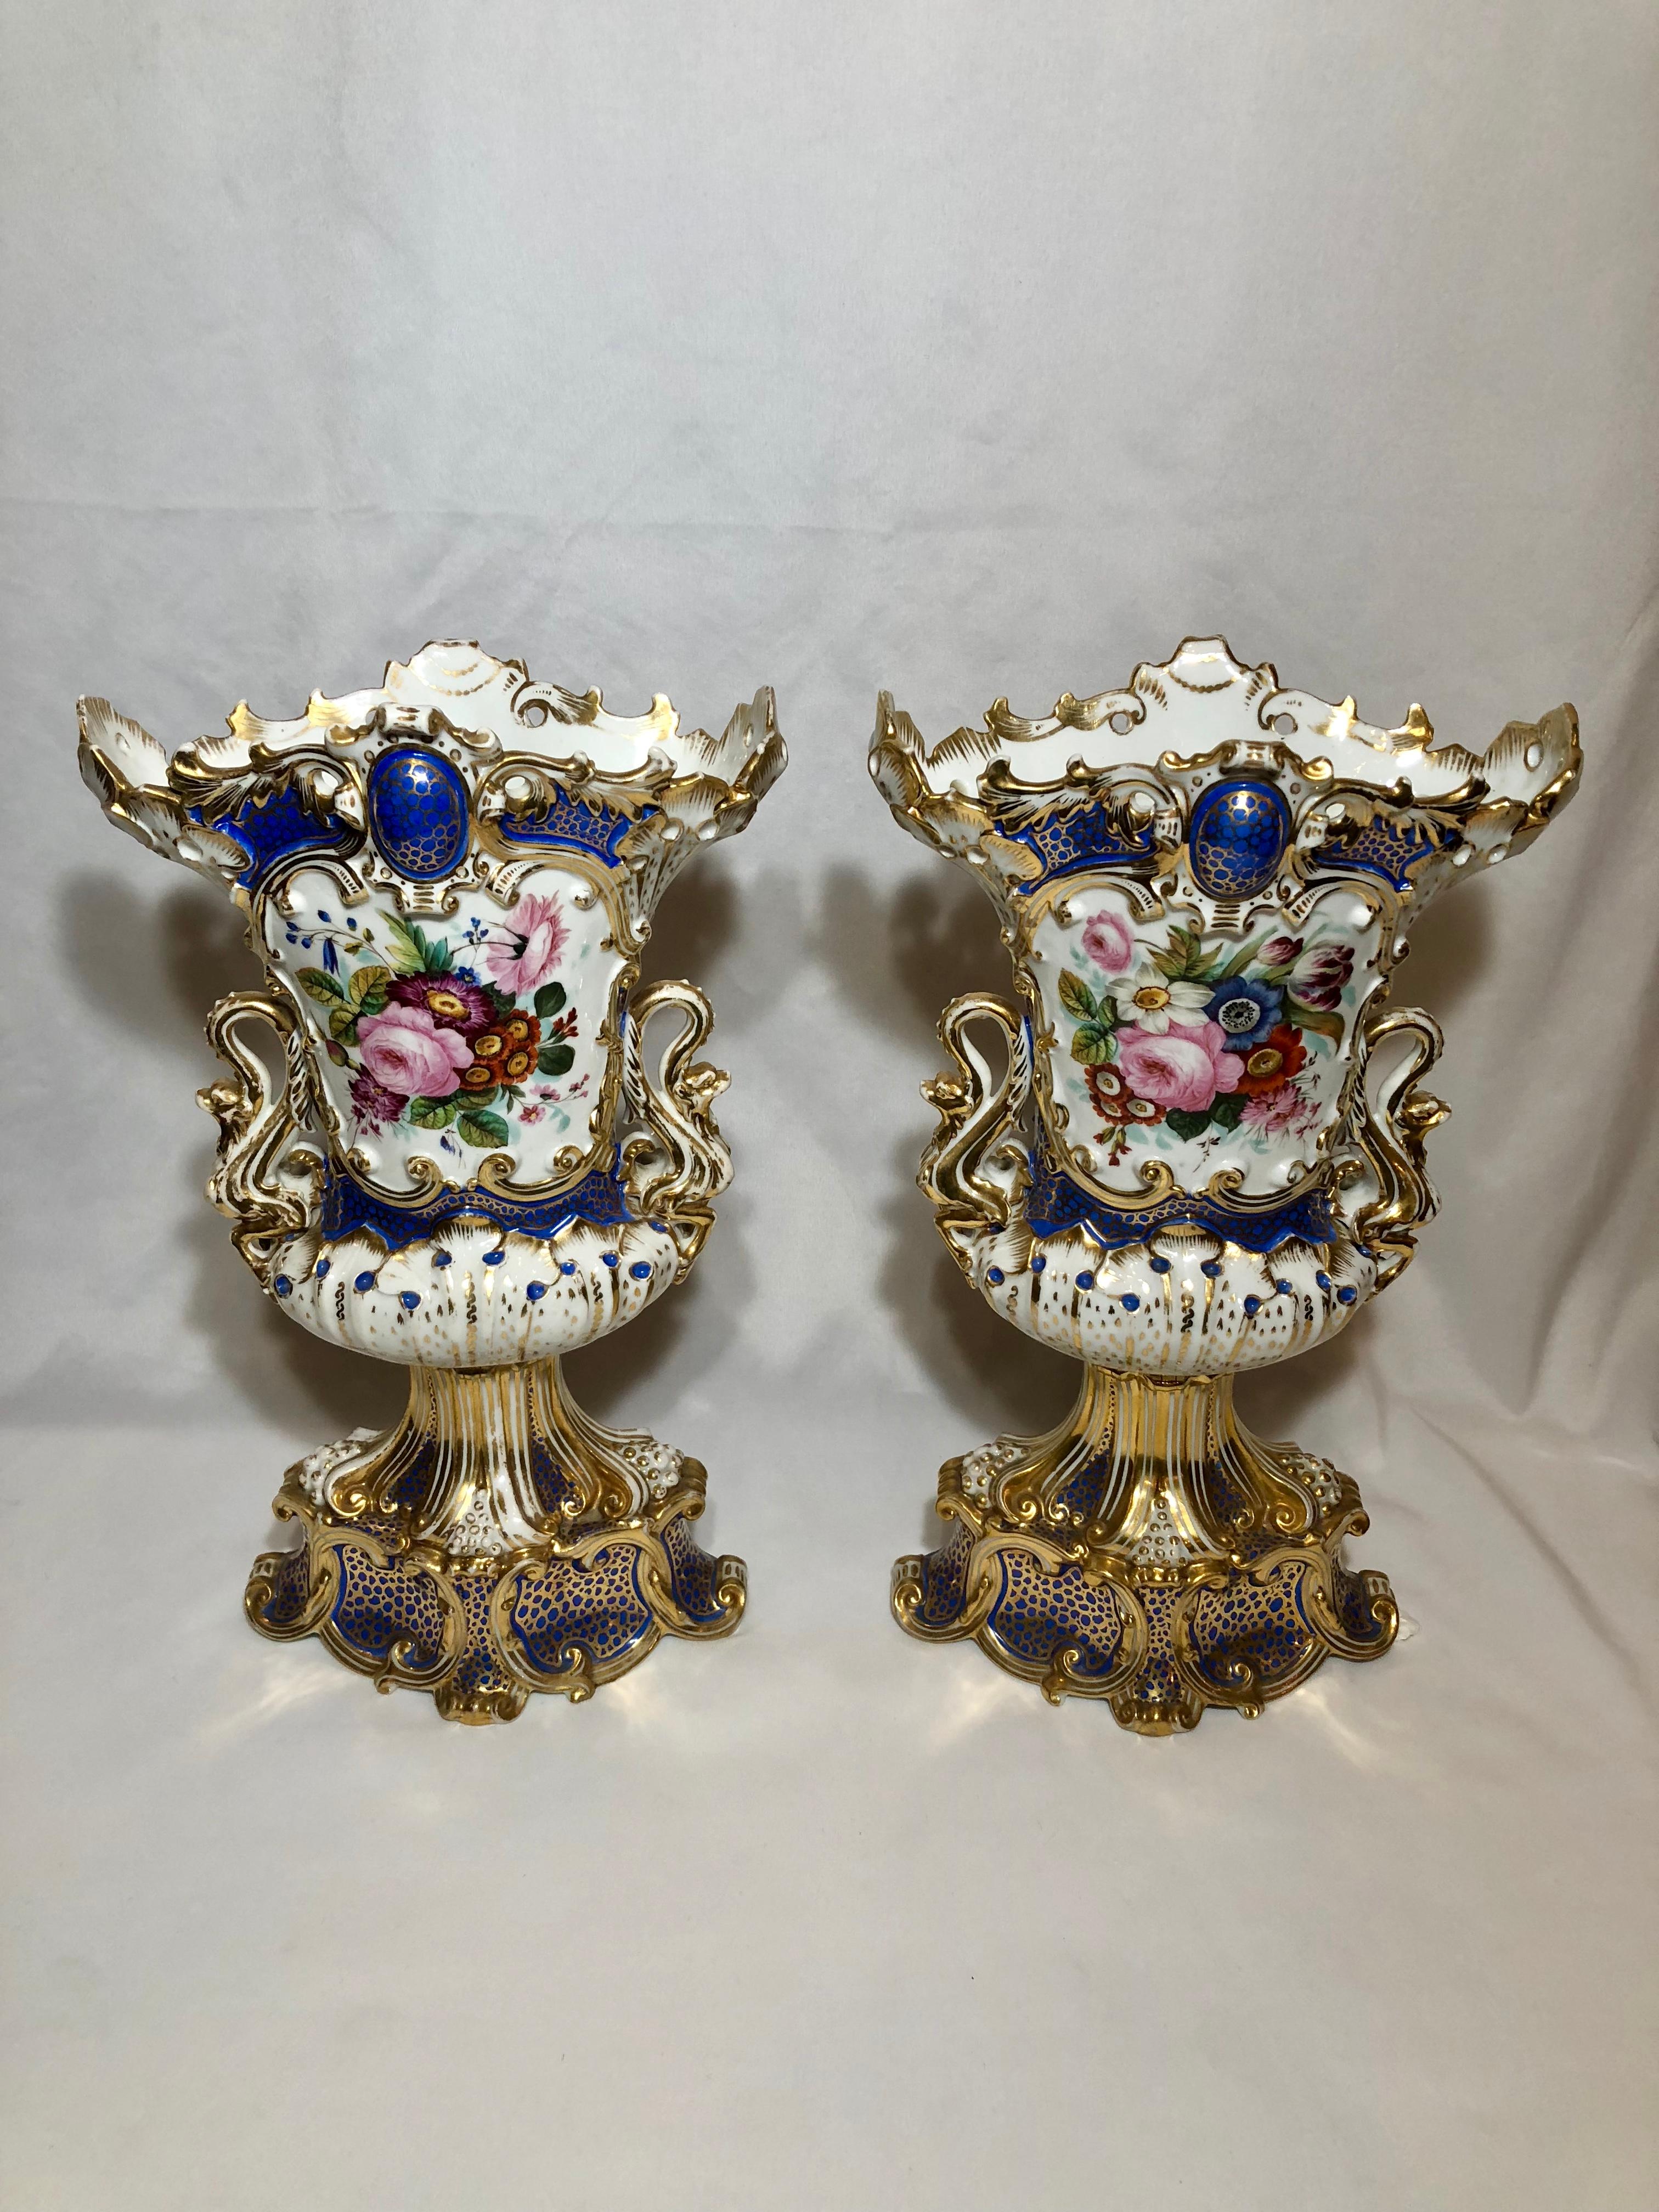 19th Century Pair of Antique French Old Paris Hand-Painted Vases